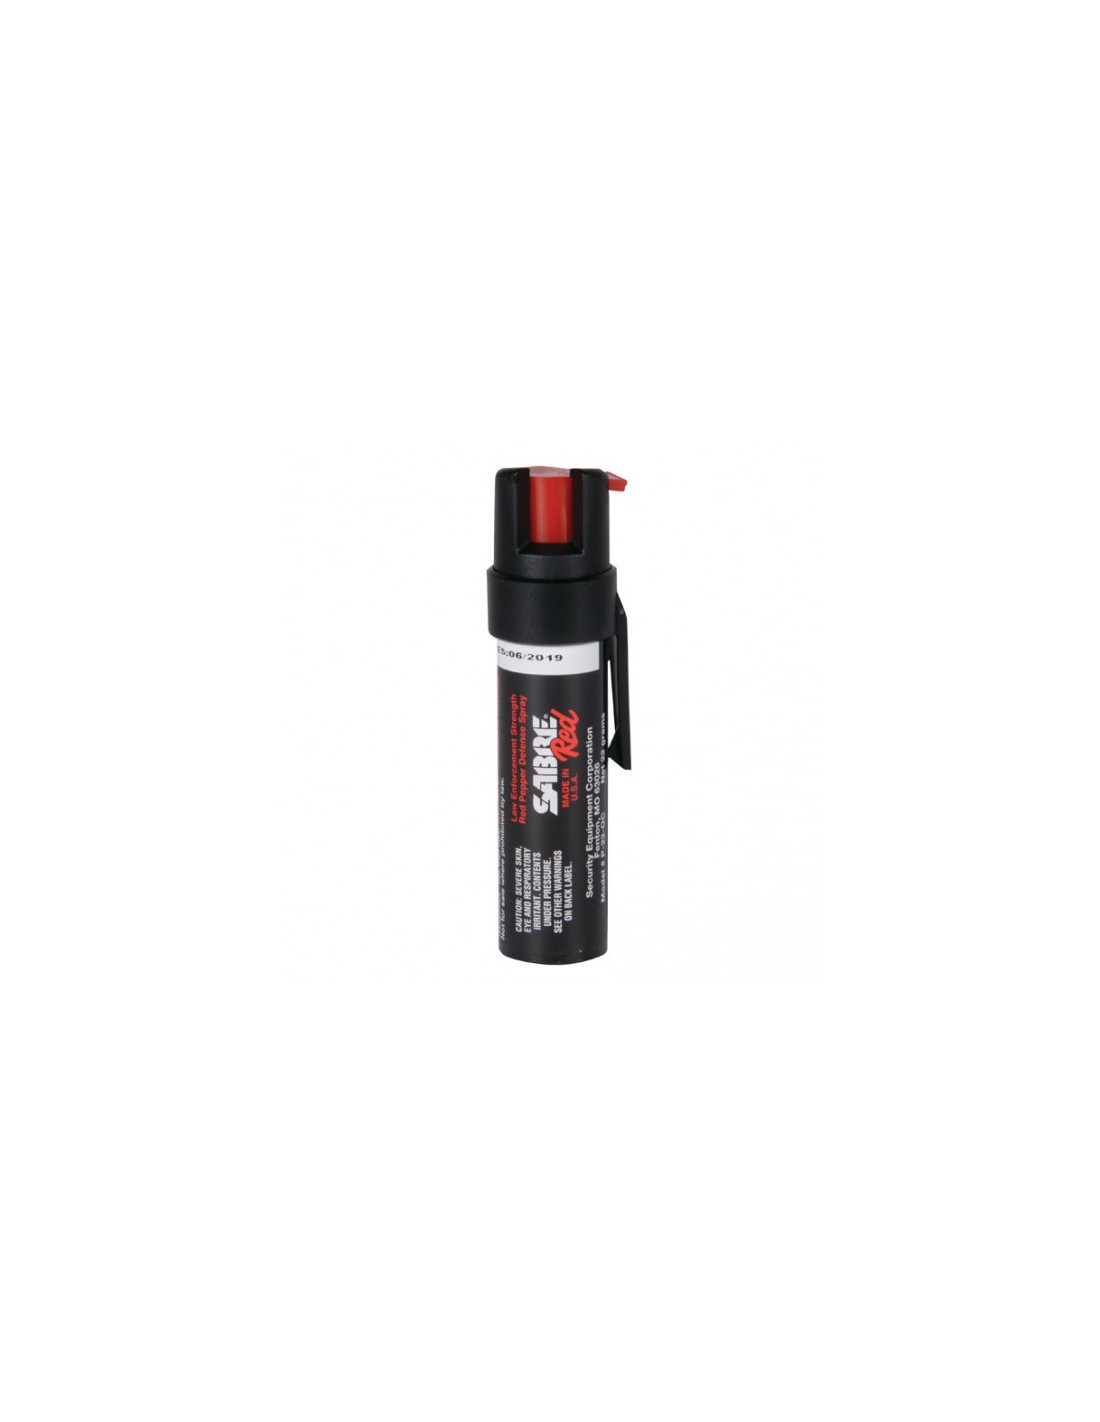 Bombe gel Poivre - 60ml - Sabre Red - SD-Equipements